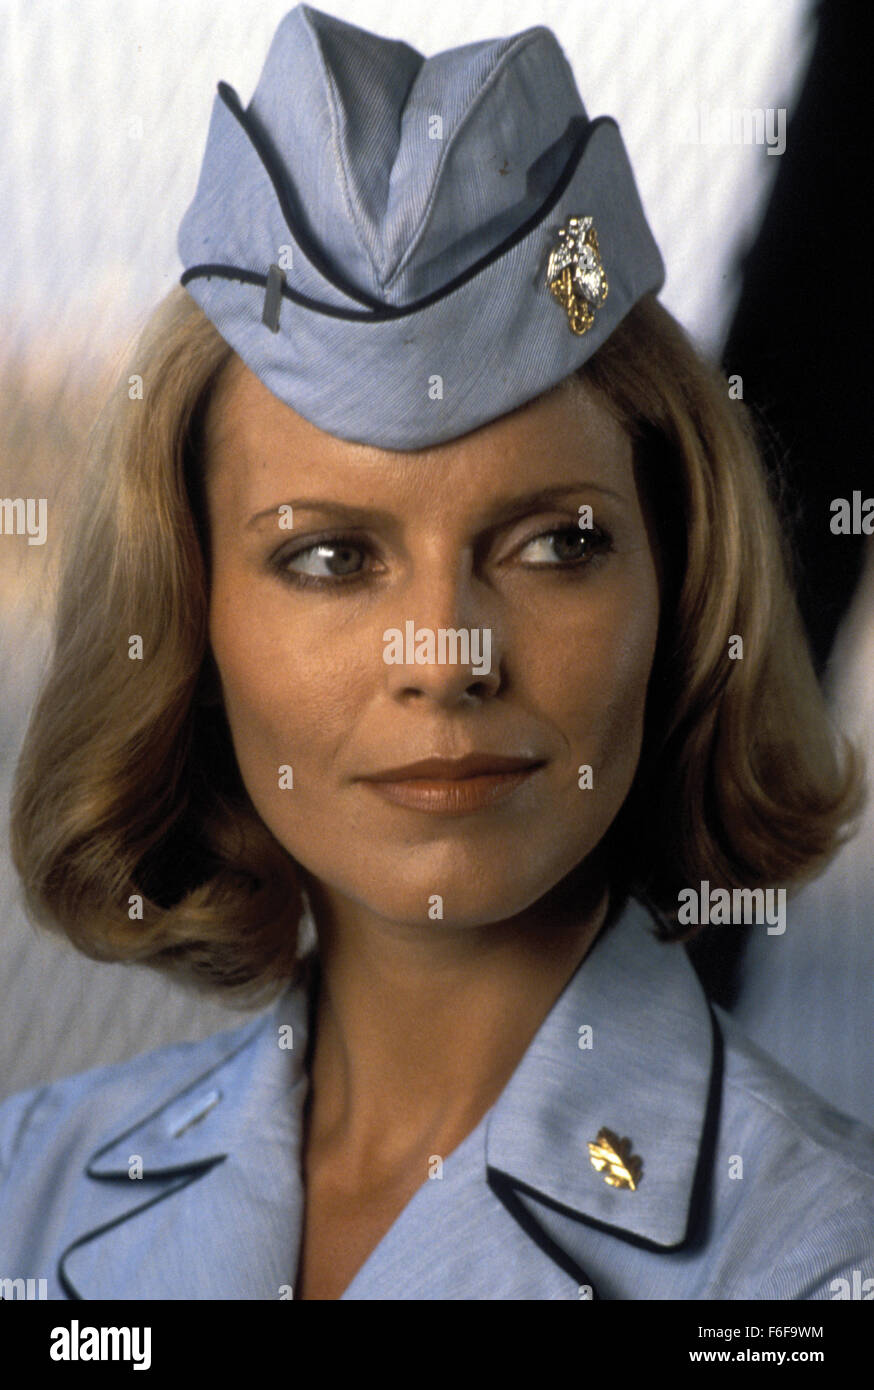 RELEASE DATE: March 30, 1984  MOVIE TITLE: Purple Hearts  DIRECTOR: Sidney Furie  STUDIO: The Ladd Company  PLOT: Uknown  PICTURED: CHERYL LADD as Deborah Solomon  (Credit Image: c The Ladd Company/Entertainment Pictures) Stock Photo